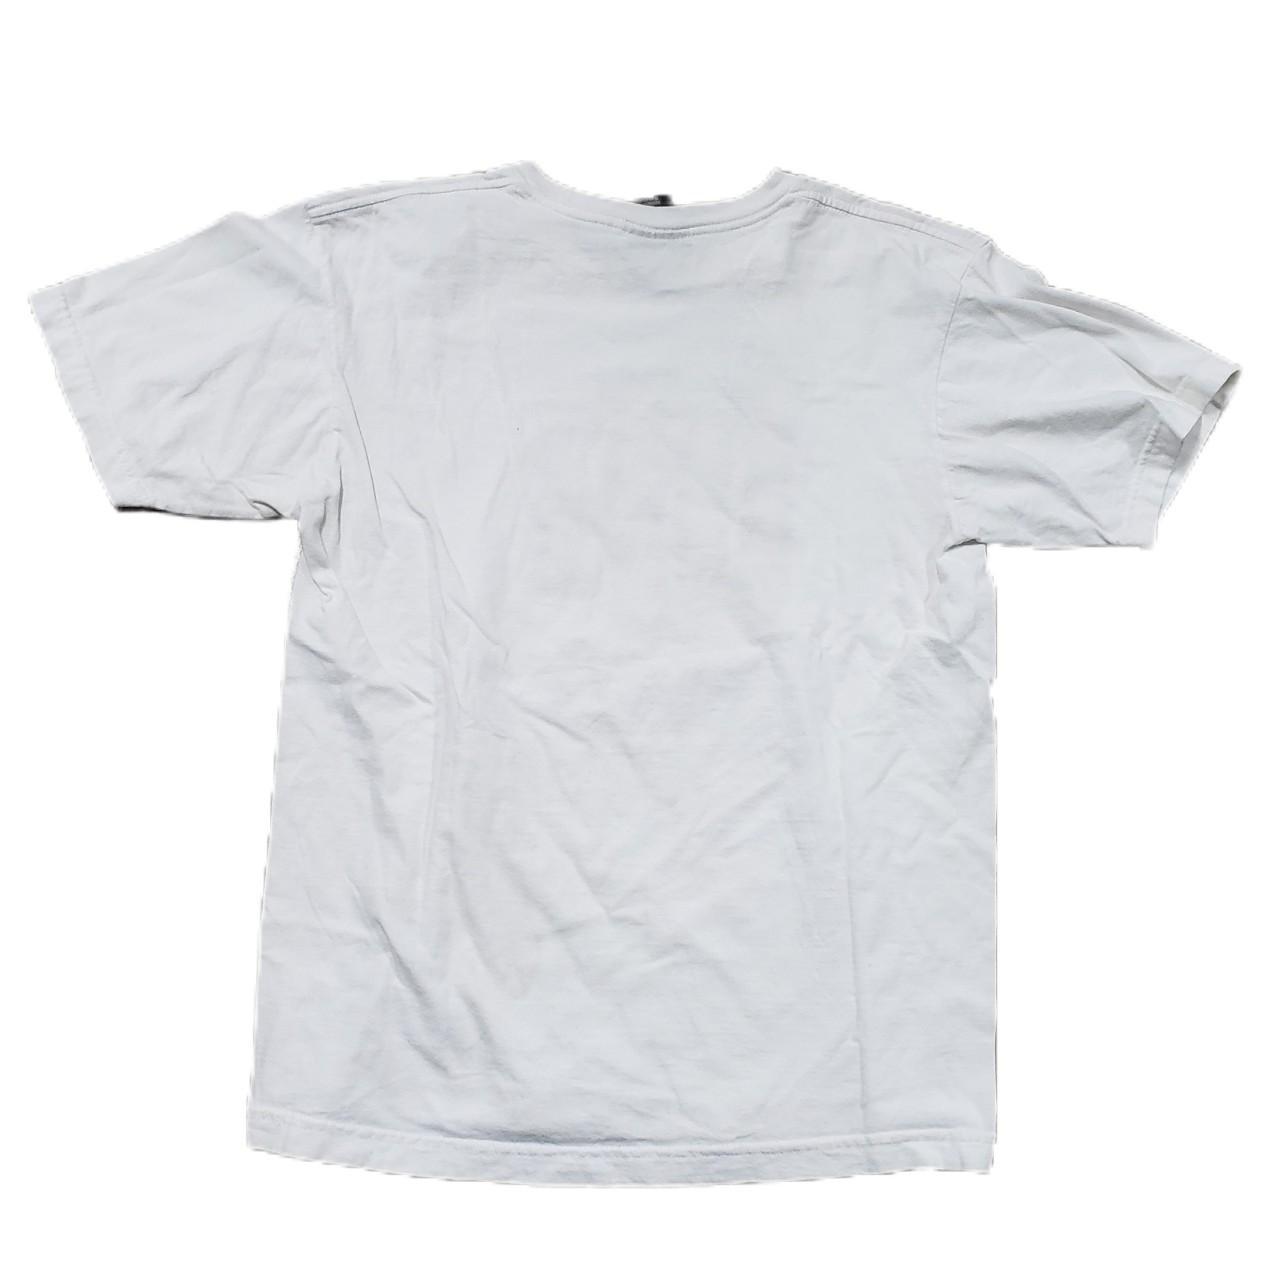 Product Image 3 - Men's Undefeated T-shirt 

Size: Medium

Color: